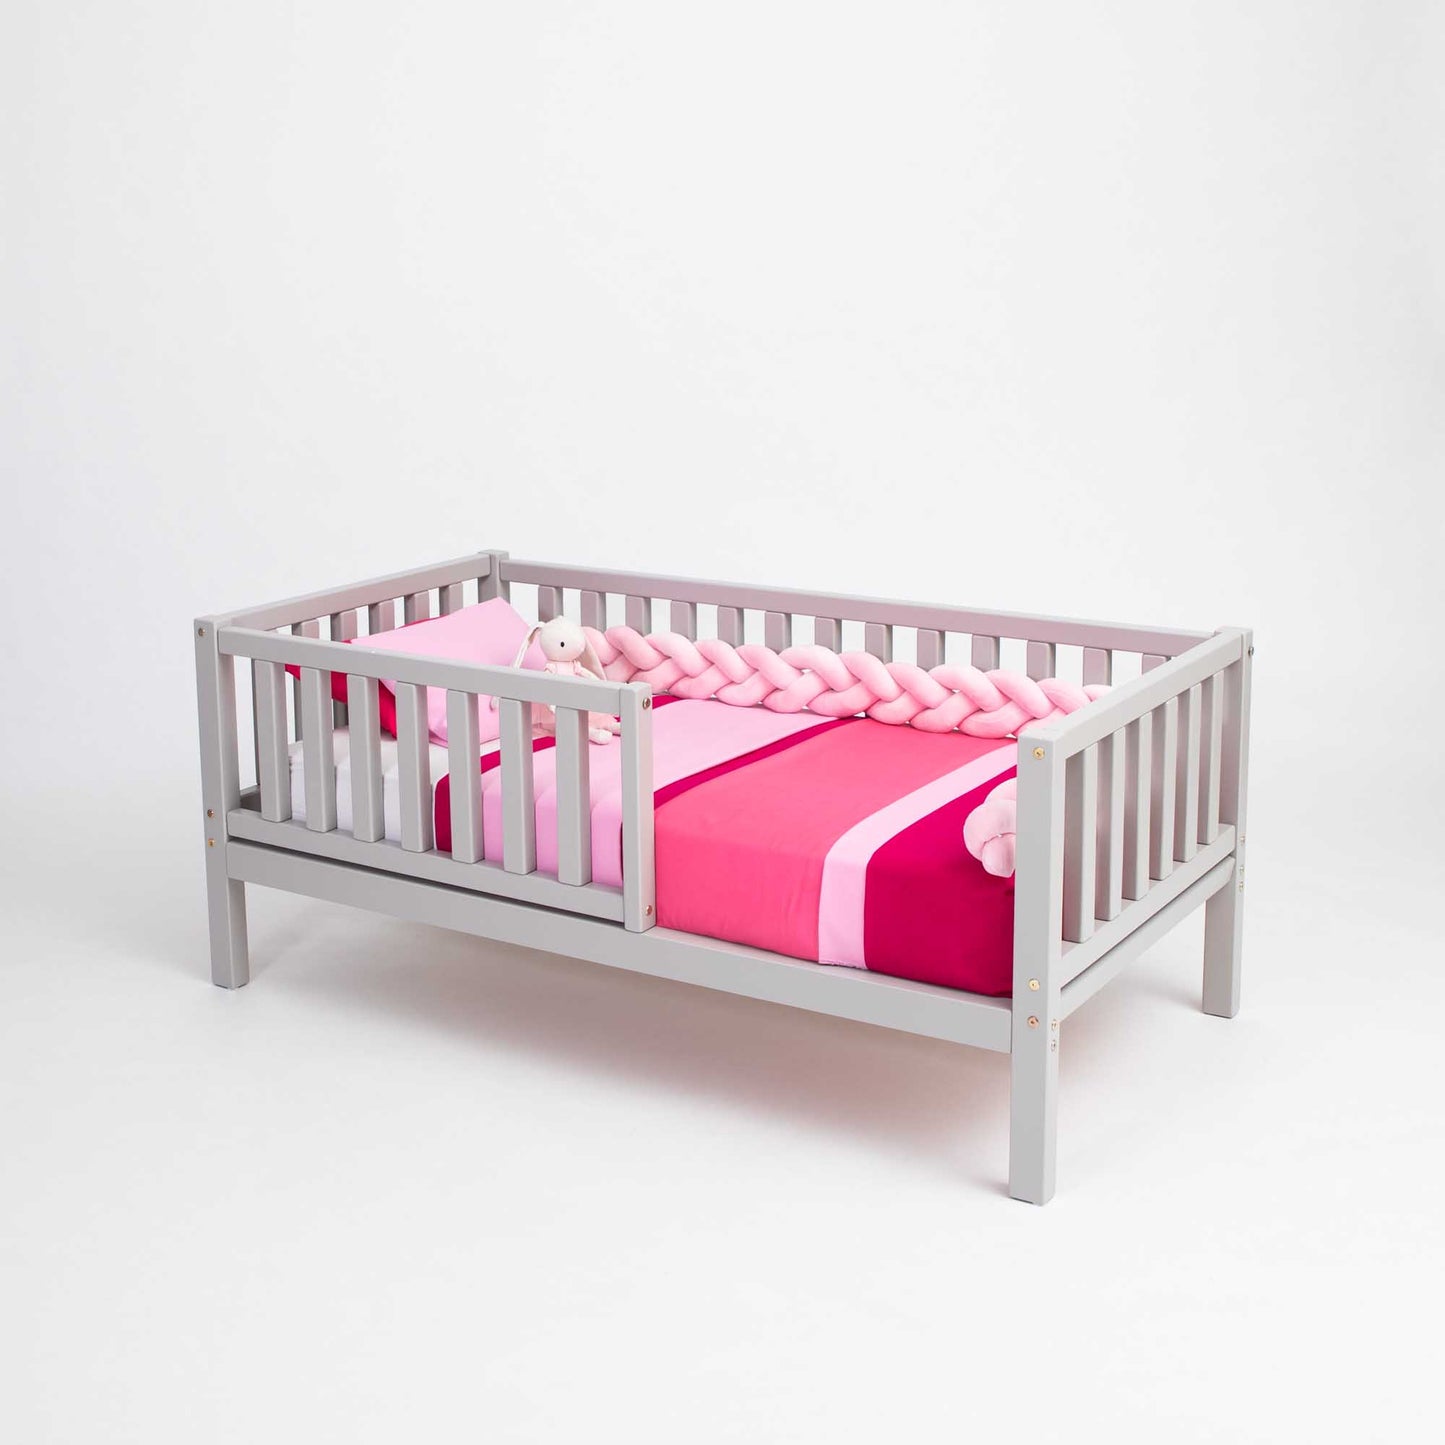 A Sweet Home From Wood toddler bed on legs with a fence and a pink and grey blanket for independent sleeping.